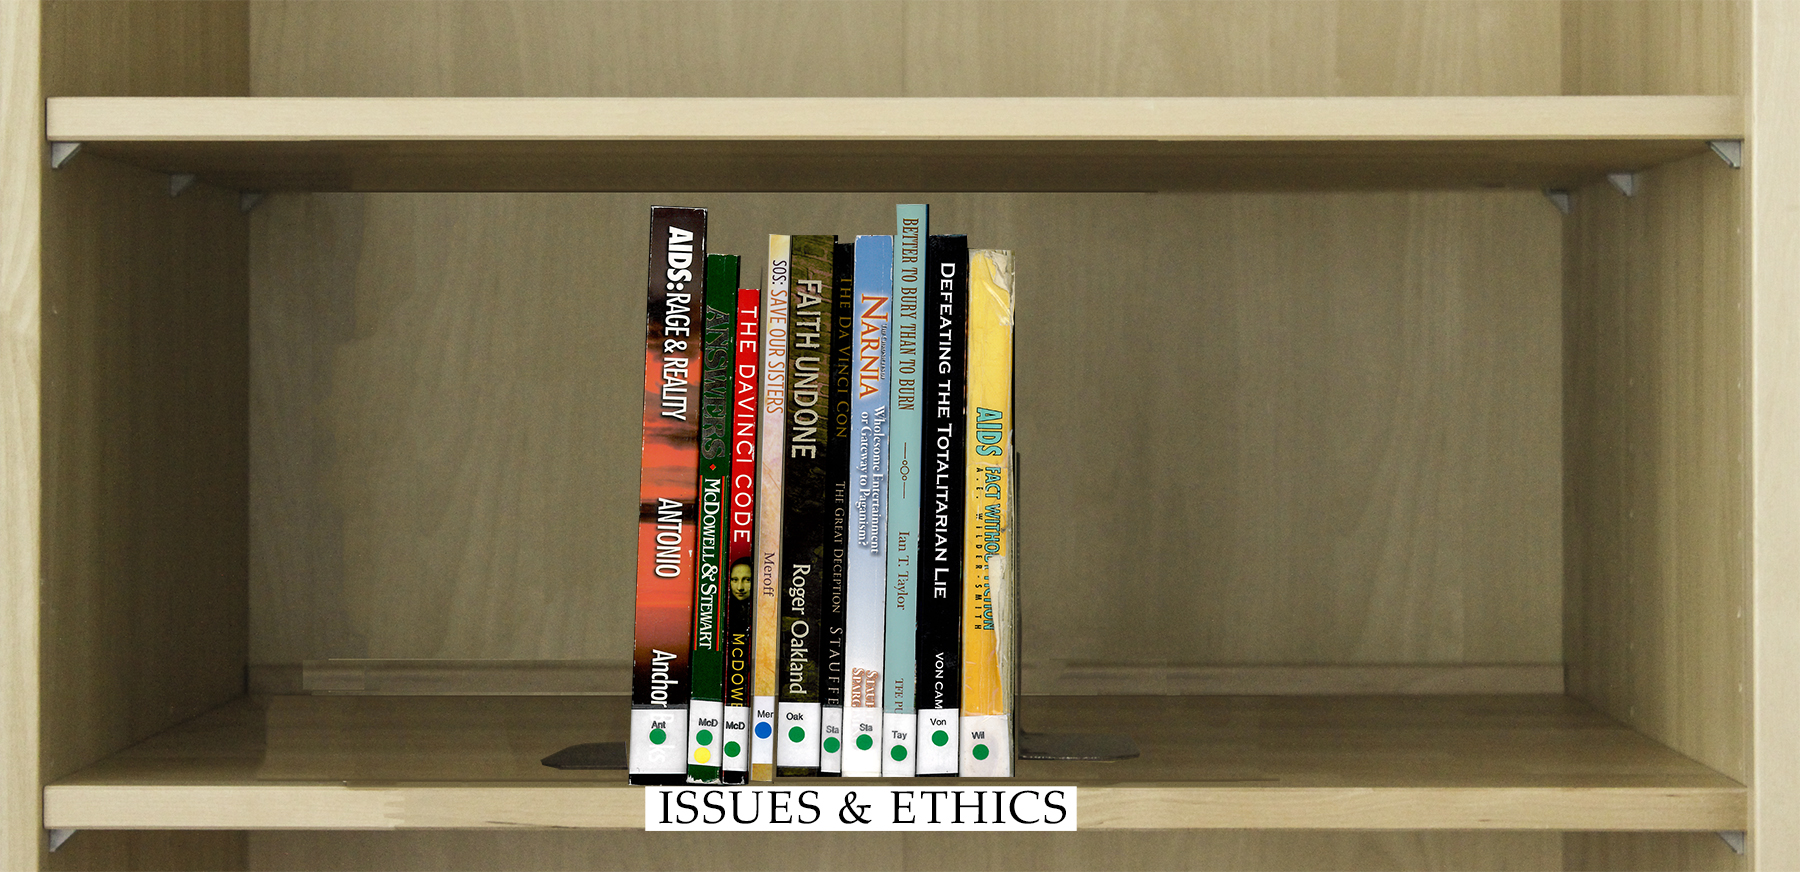 Index of Books Under the Category Issues & Ethics.